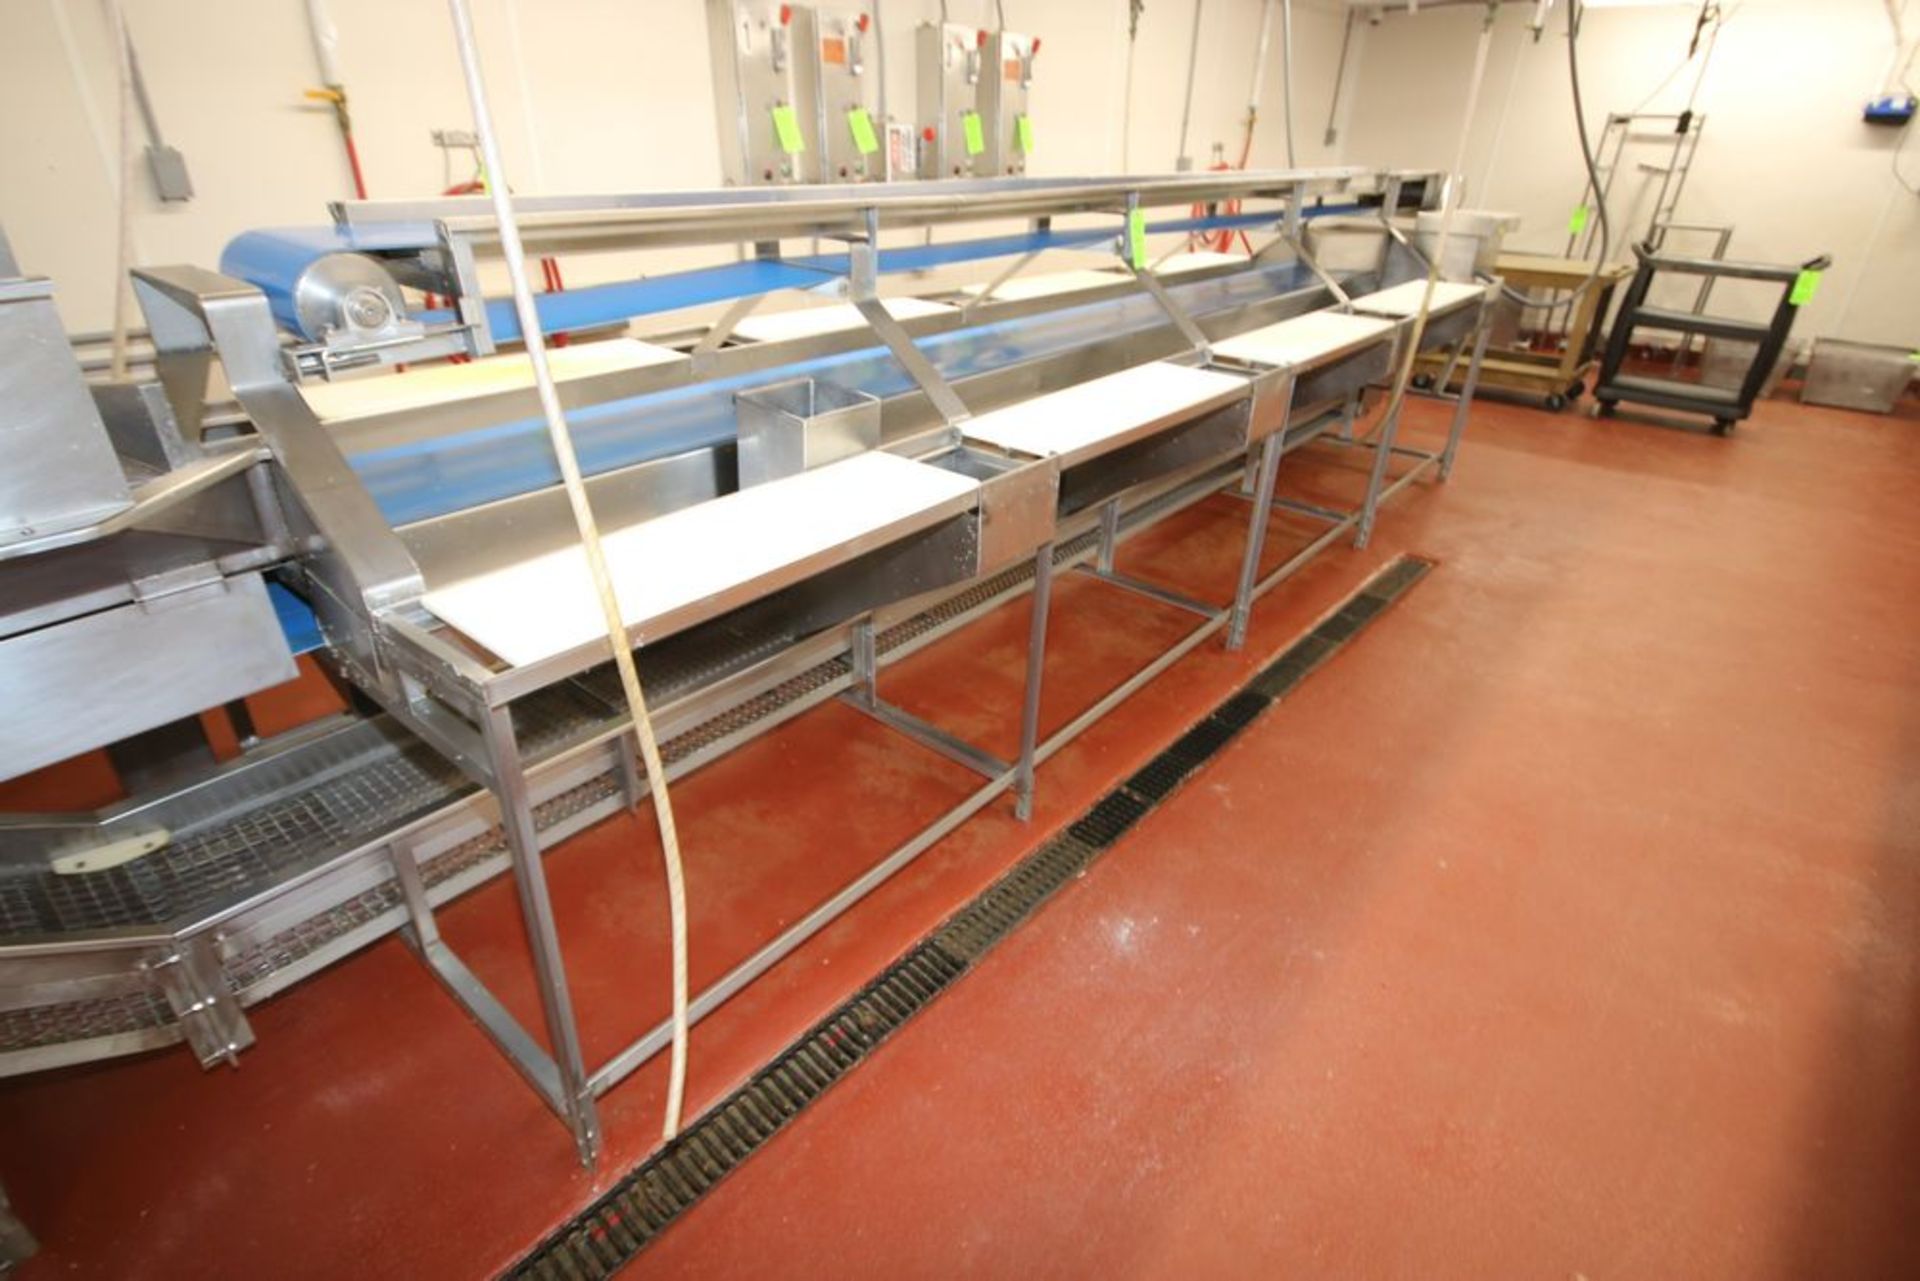 S/S Triple Conveyor Fish Filleting Station, with Top Filet Conveyor, Aprox. 220" L x 12" W Belt, - Image 5 of 9